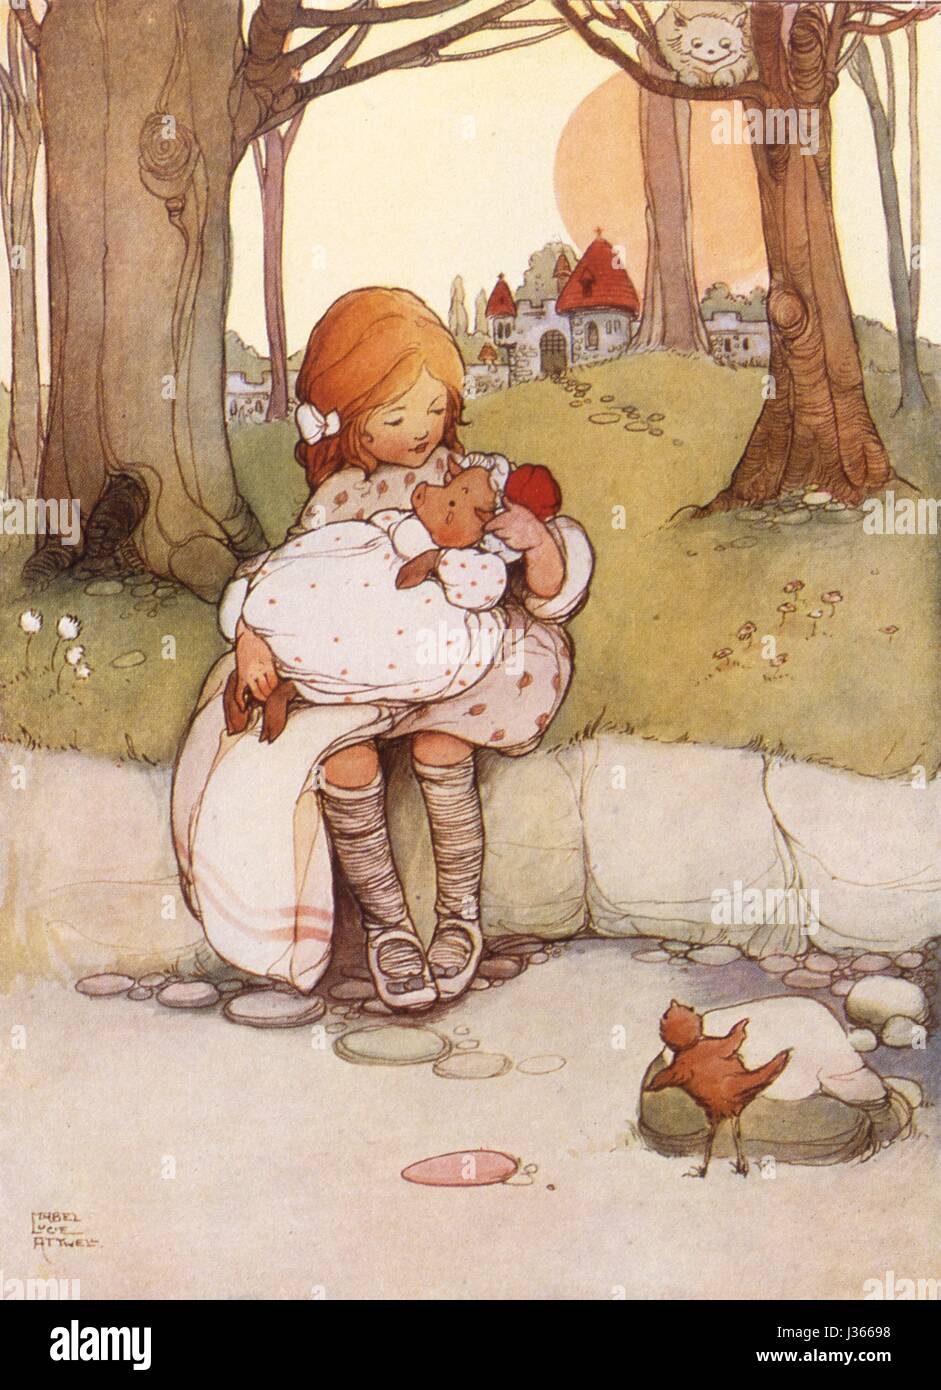 Illustration by Mabel Lucie Attwell  Alice in Wonderland, by Lewis Carroll  London, Raphael Tuck, 1910.    Alice and the baby pig. Stock Photo